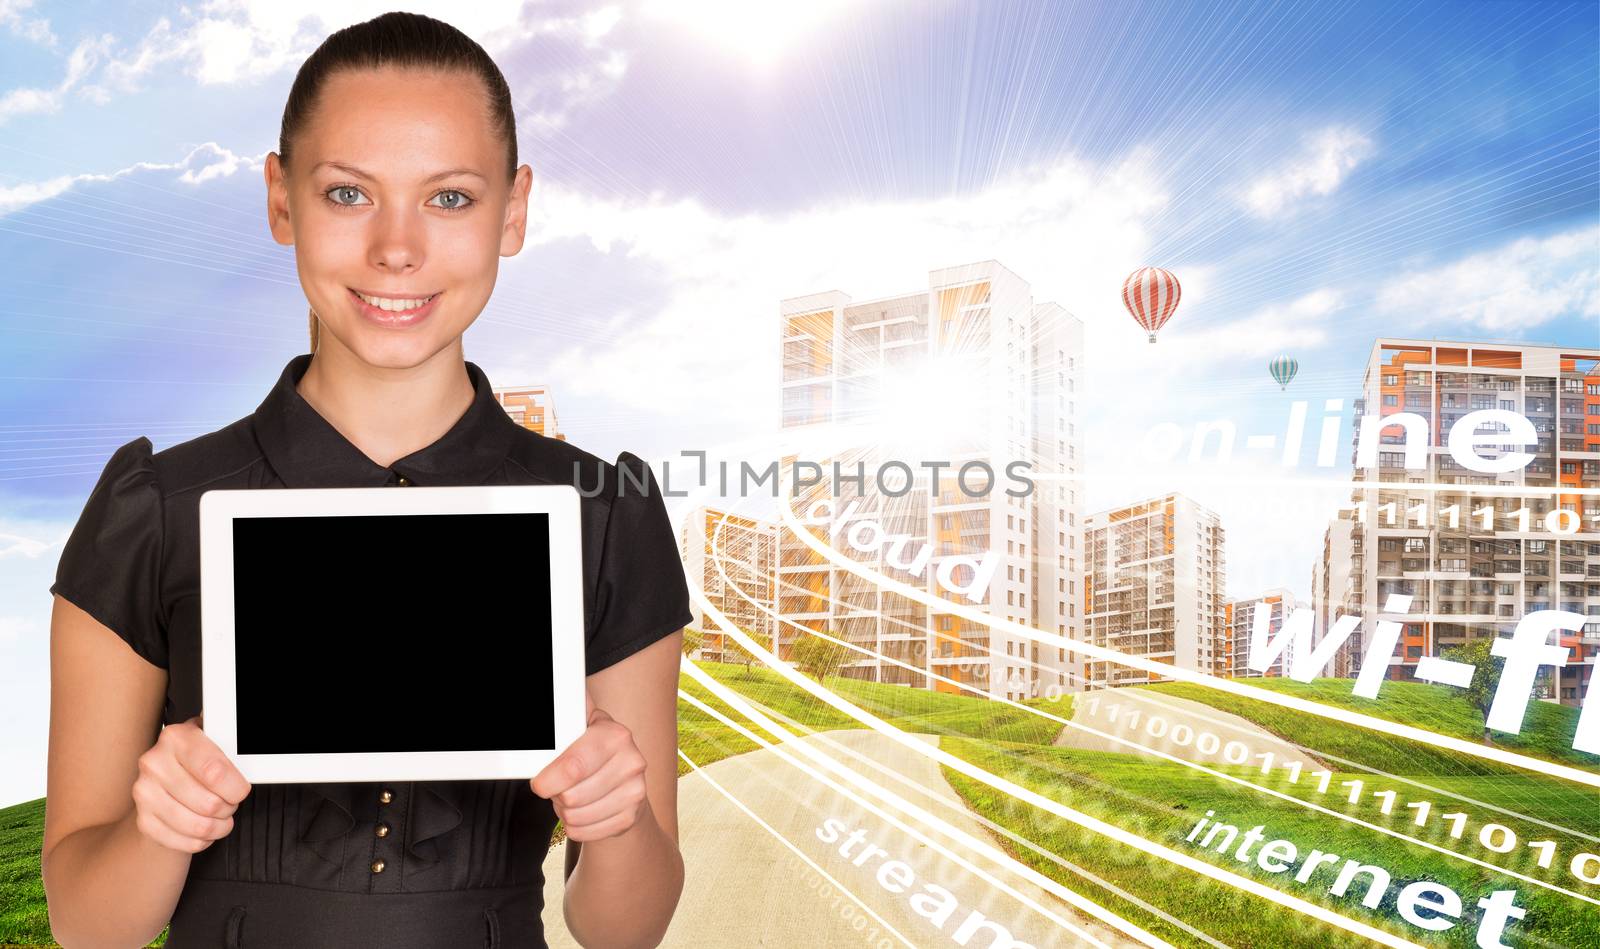 Businesslady holding tablet and cityscape under blue sky with balloons and waves